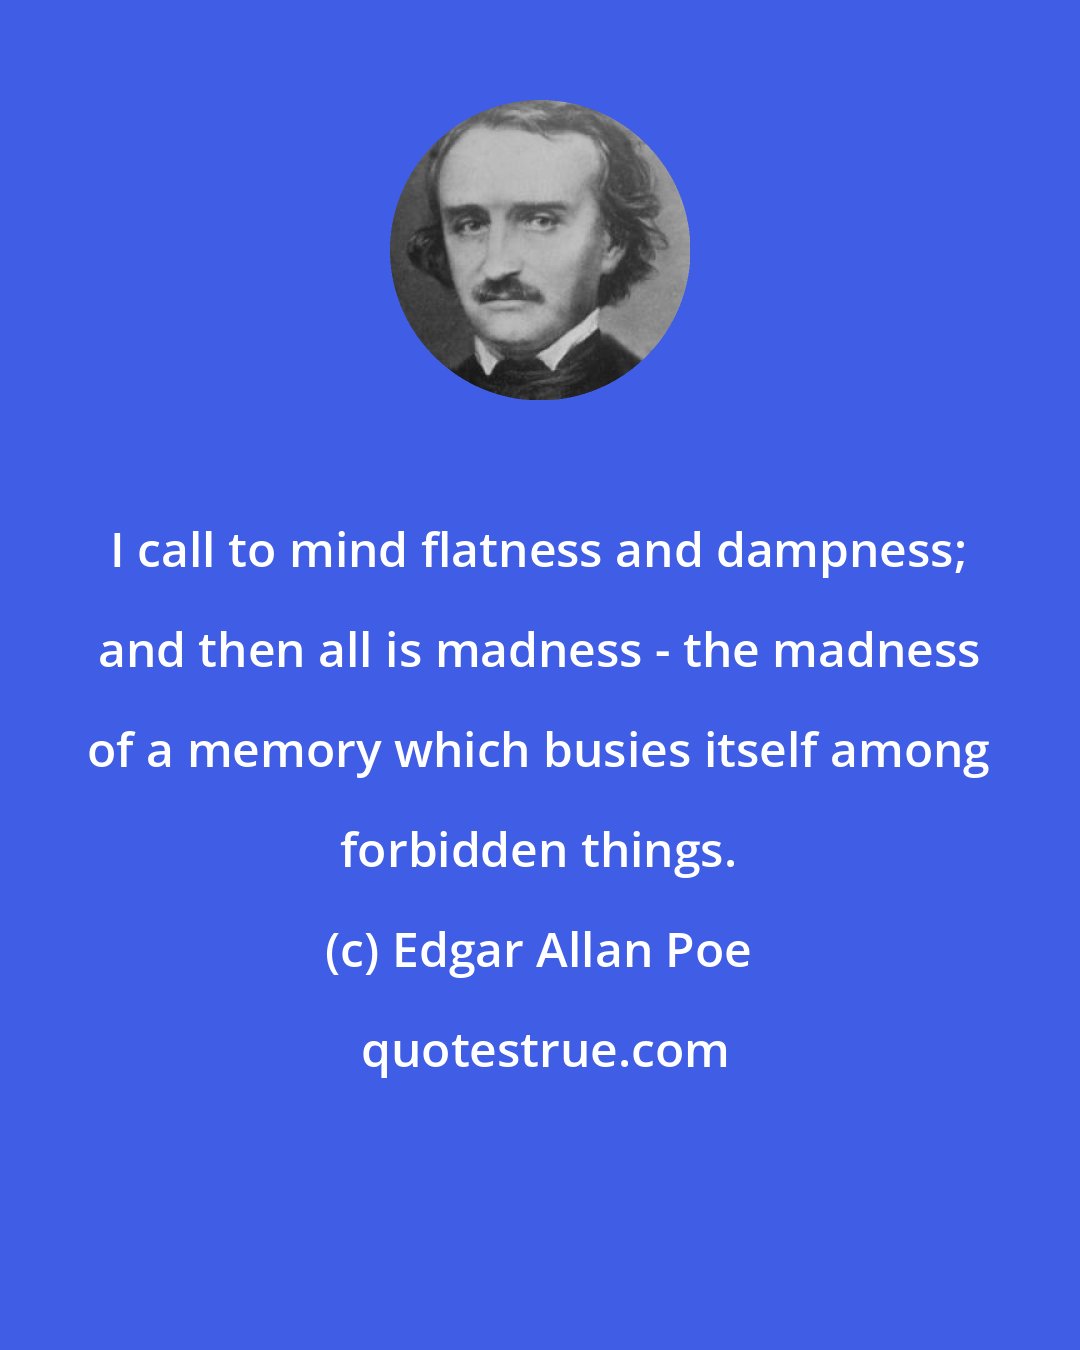 Edgar Allan Poe: I call to mind flatness and dampness; and then all is madness - the madness of a memory which busies itself among forbidden things.